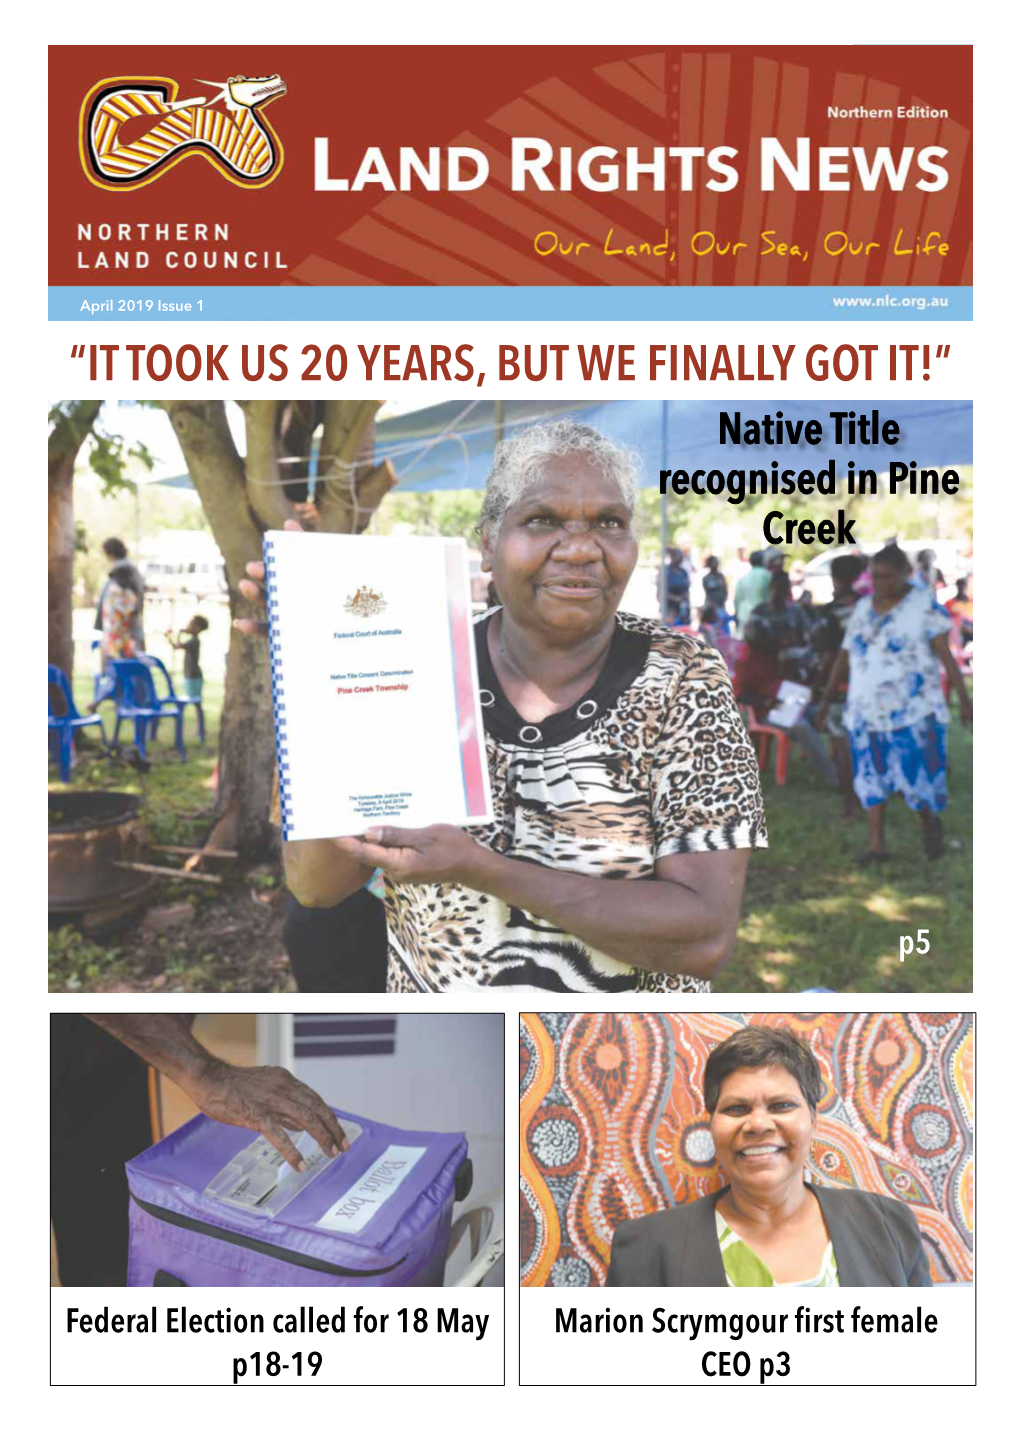 “IT TOOK US 20 YEARS, but WE FINALLY GOT IT!” Native Title Recognised in Pine Creek